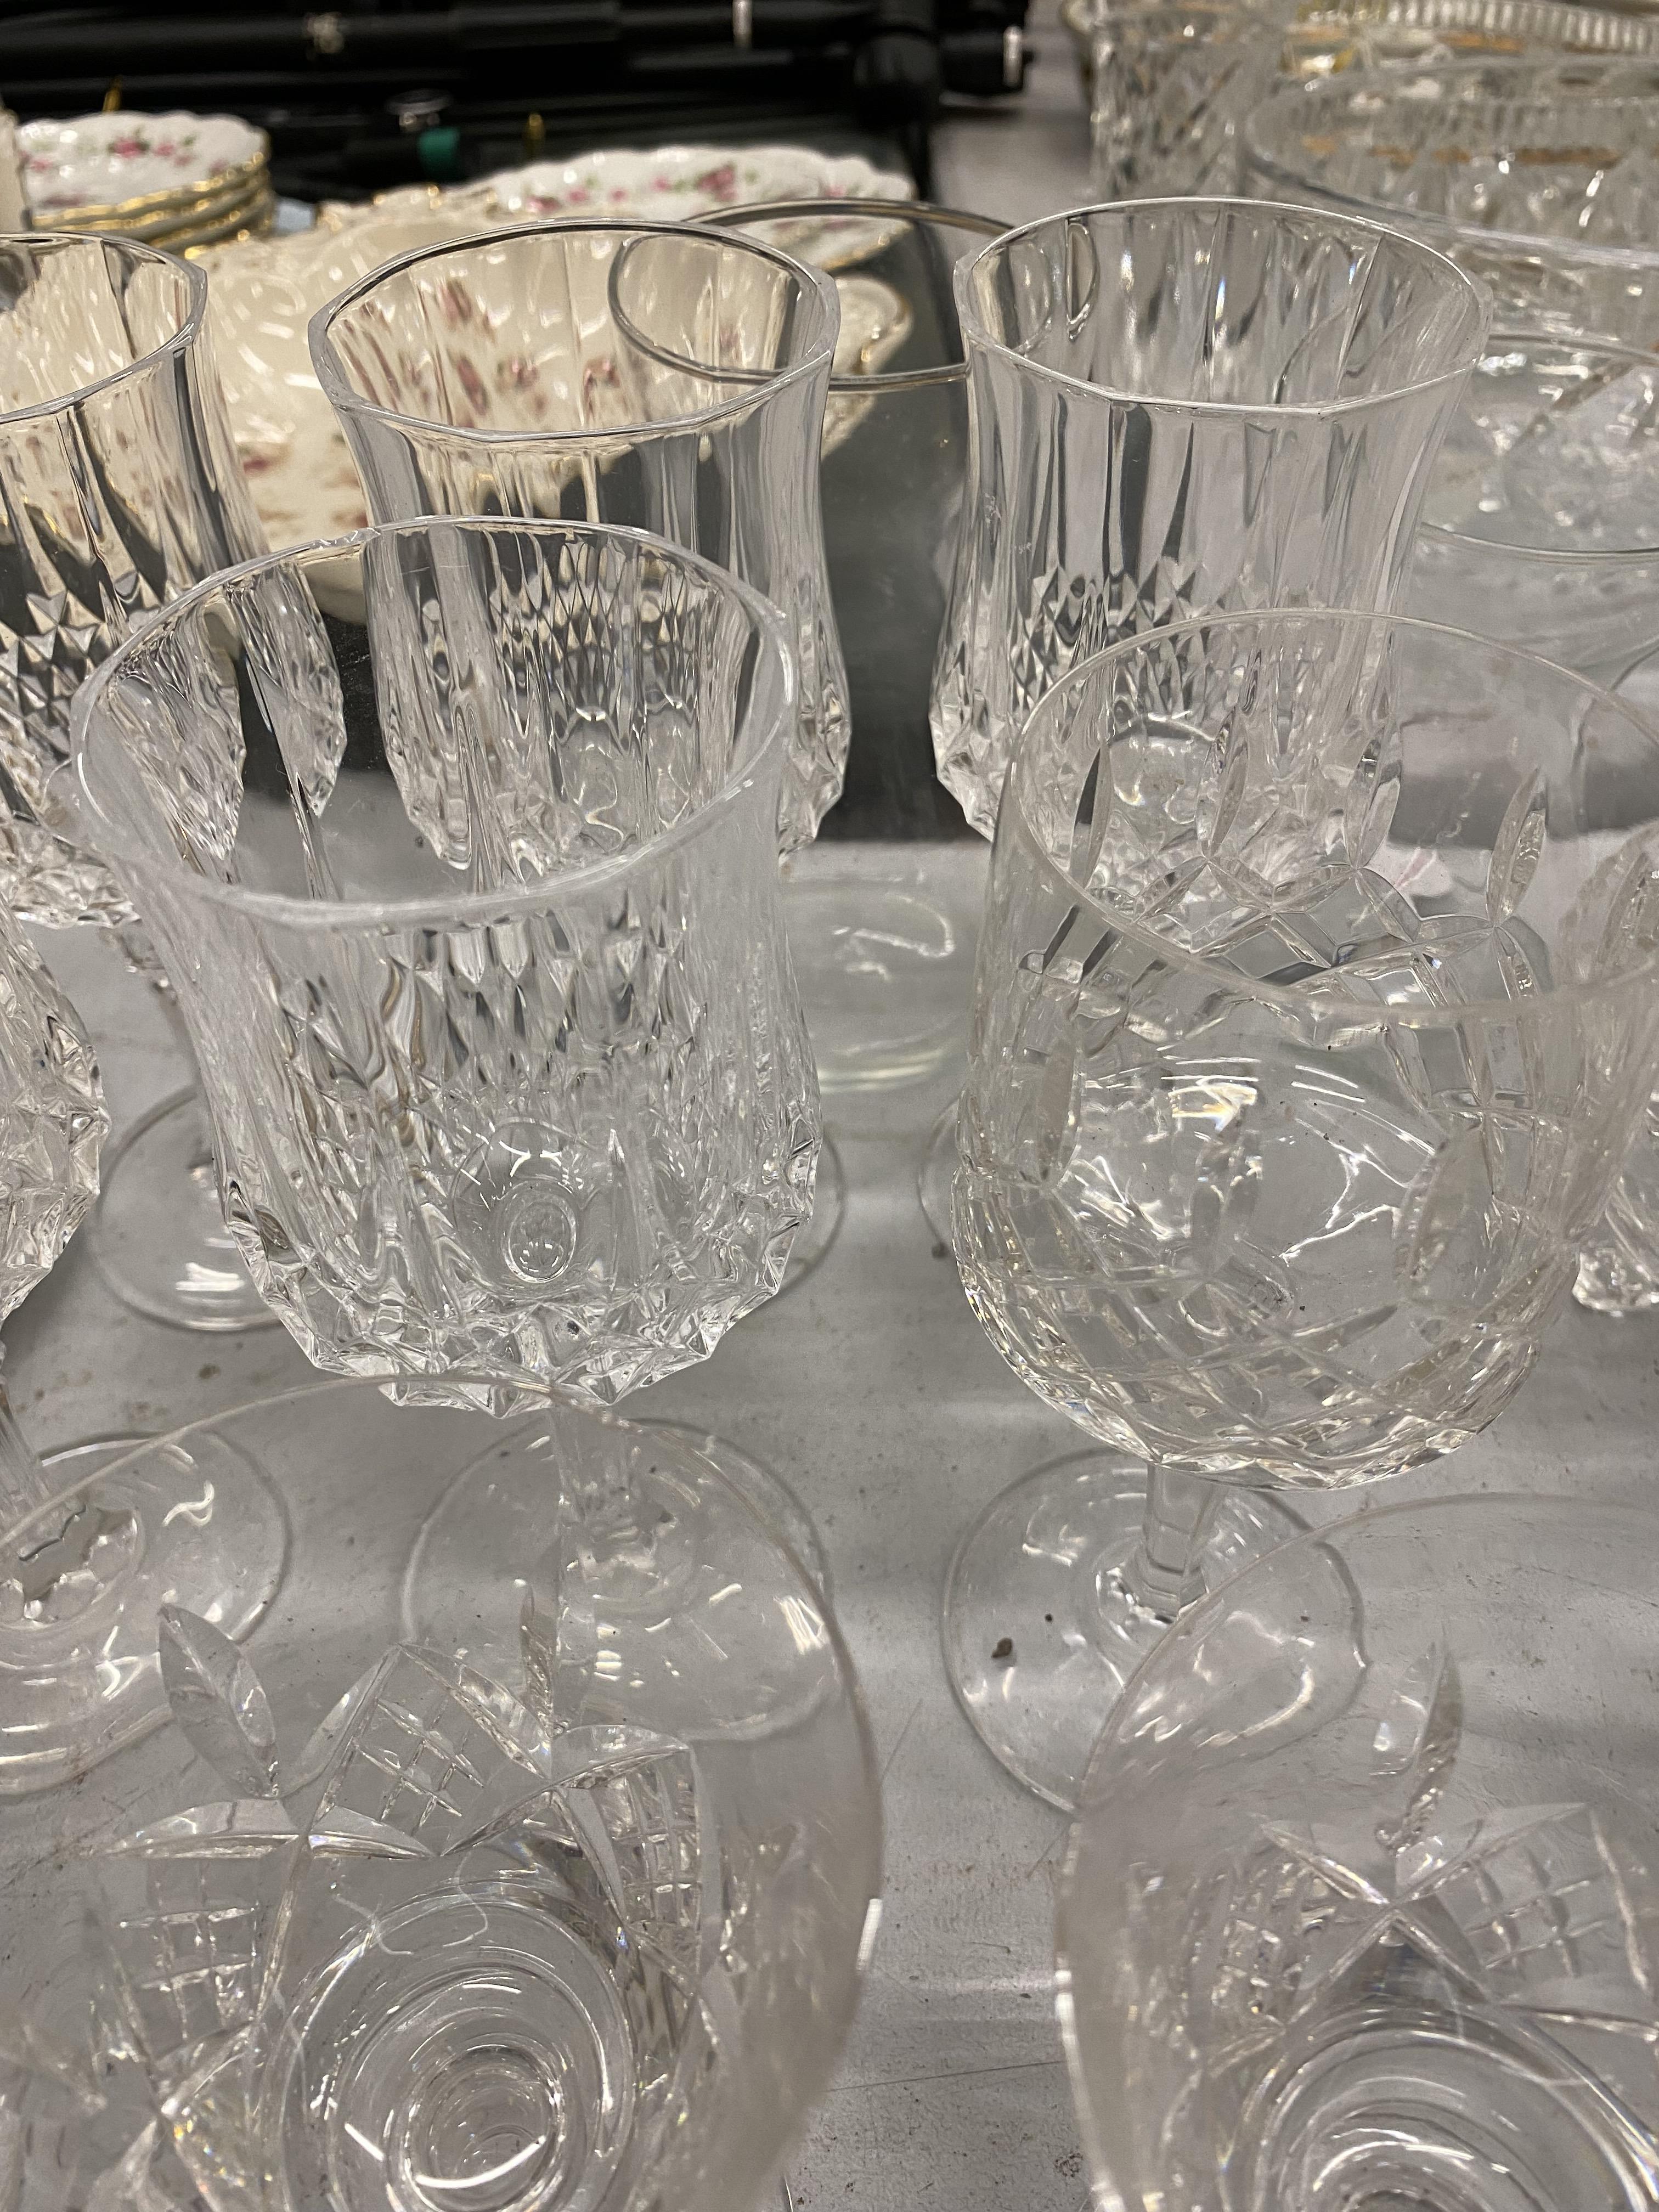 VARIDISHES ETCOUS ITEMS OF GLASSWARE TO INCLUDE GLASSES, DISHES ETC - Image 6 of 8